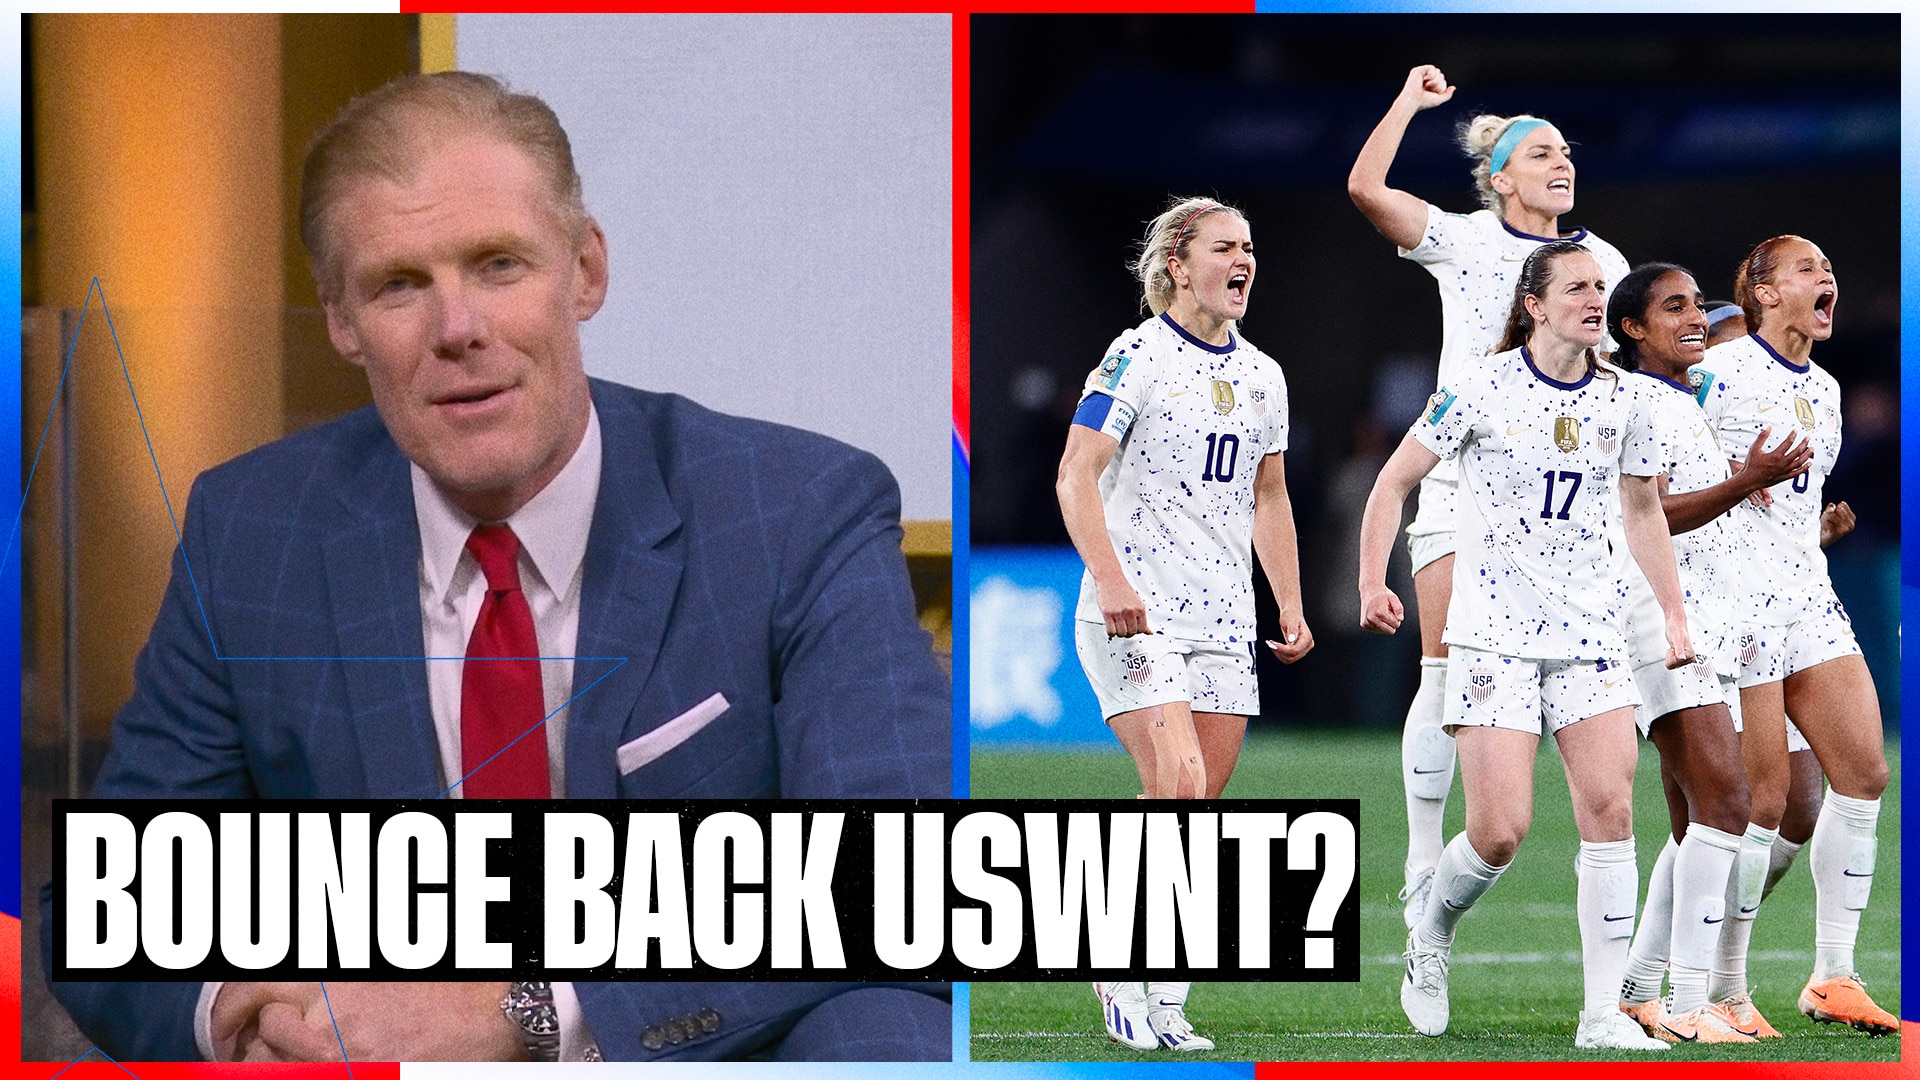 Can the USWNT BOUNCE BACK after early exit in World Cup? | SOTU